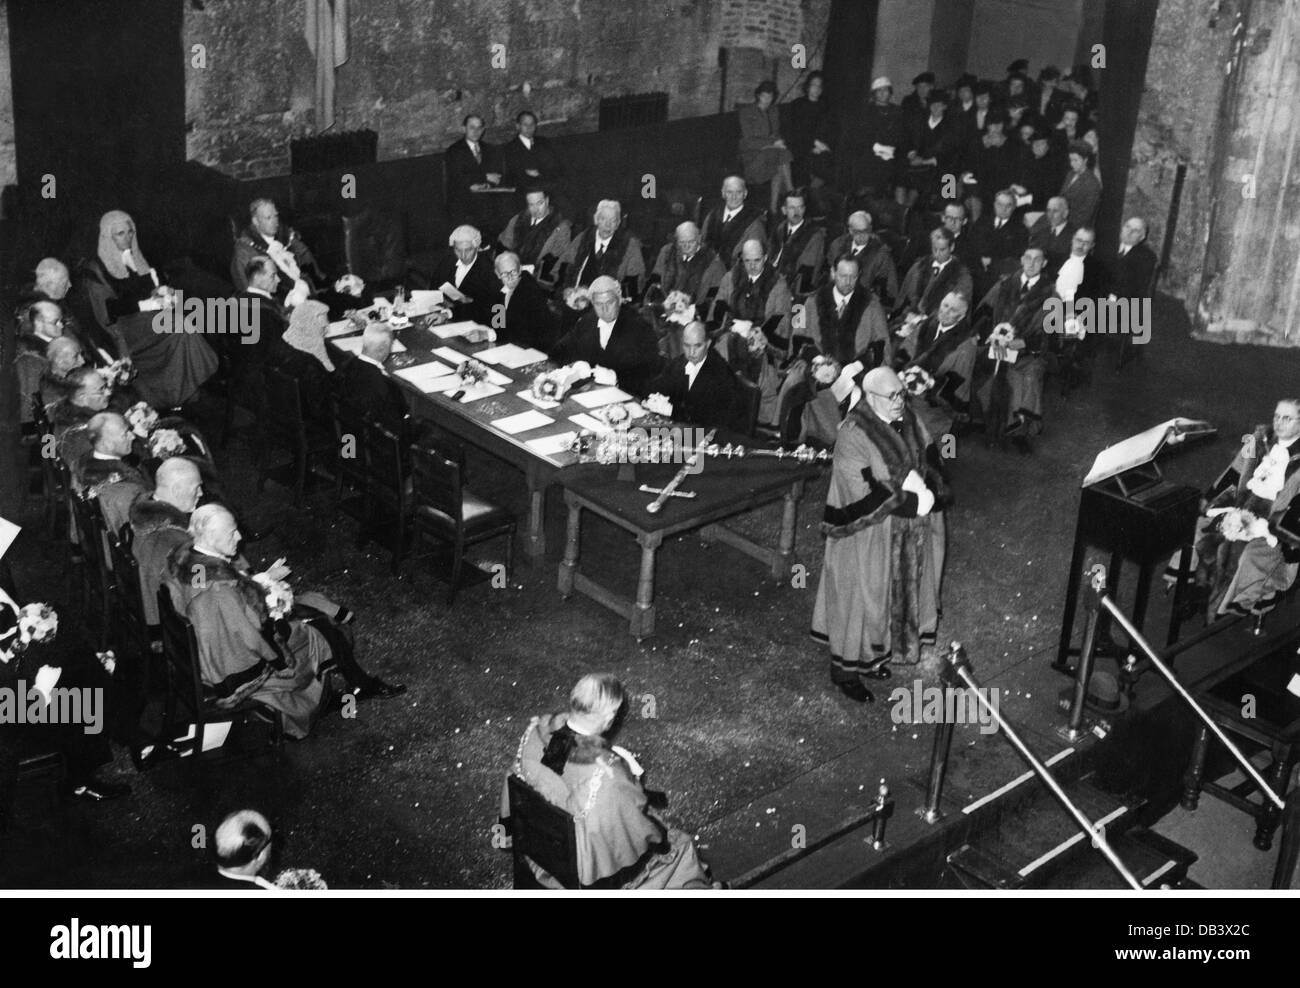 justice, courtroom scenes, court proceedings in Great Britain, 1950s / 1960s, Additional-Rights-Clearences-Not Available Stock Photo